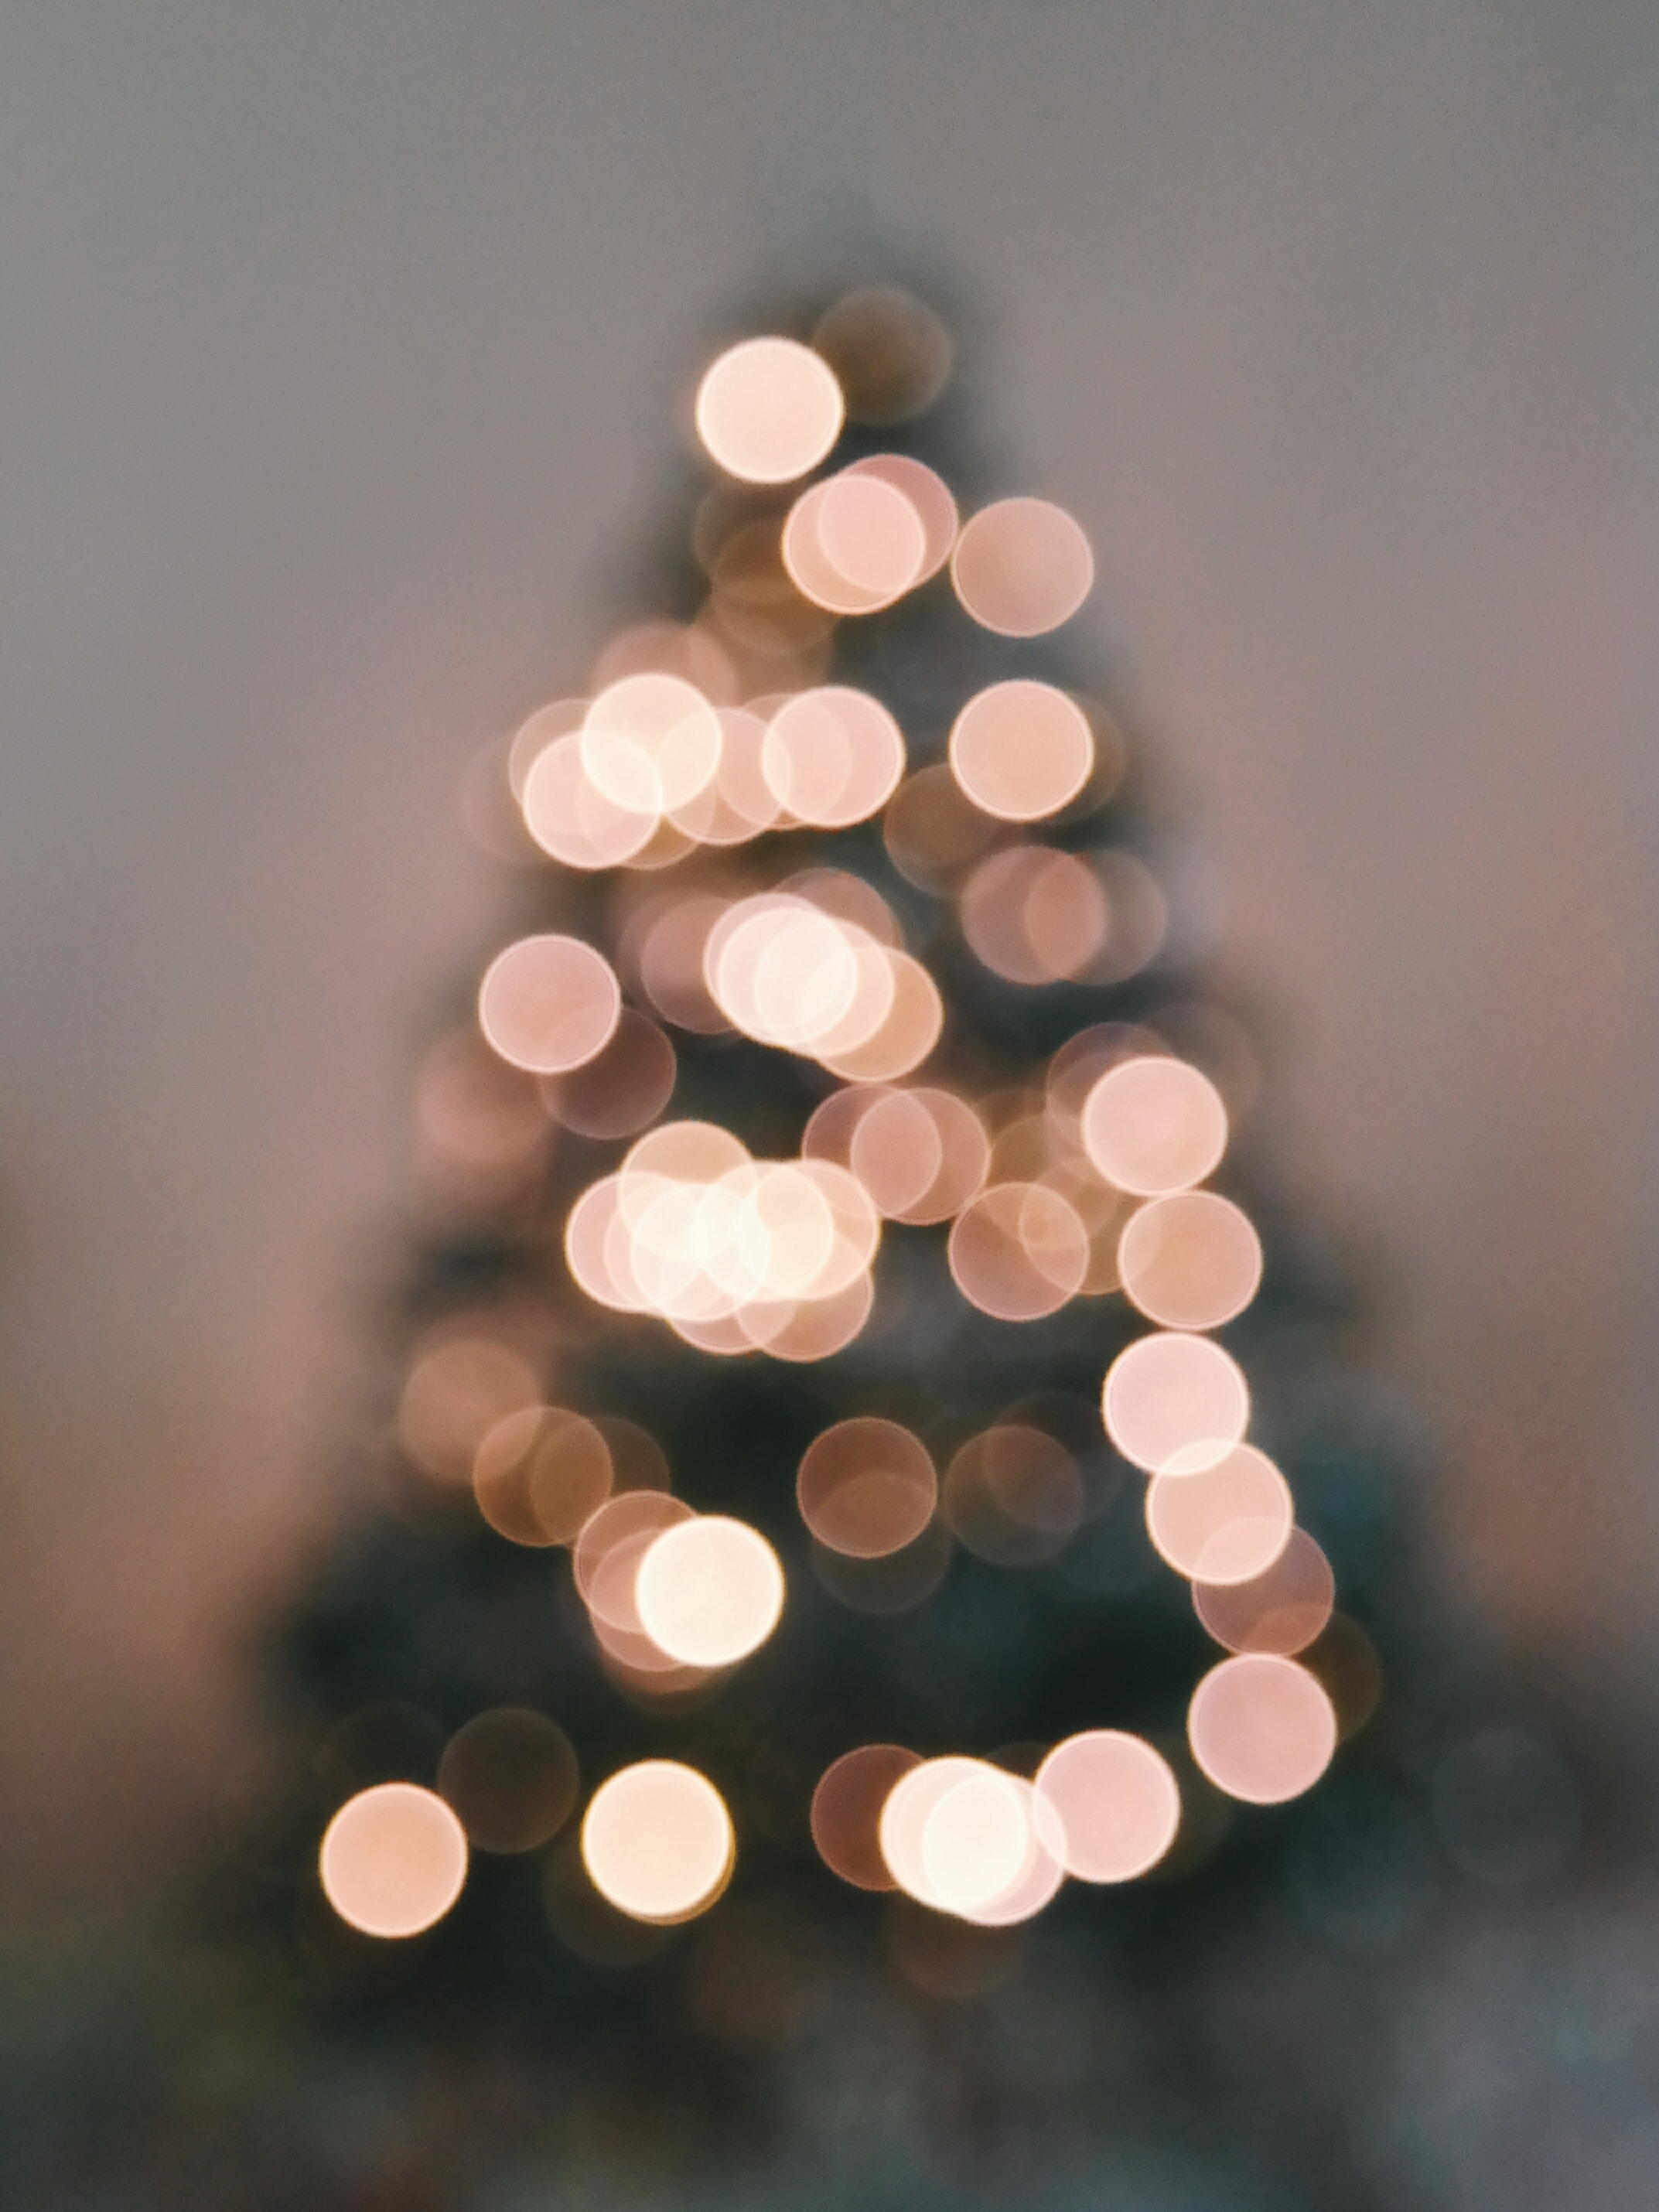 Aesthetic Christmas Profile Picture Wallpapers